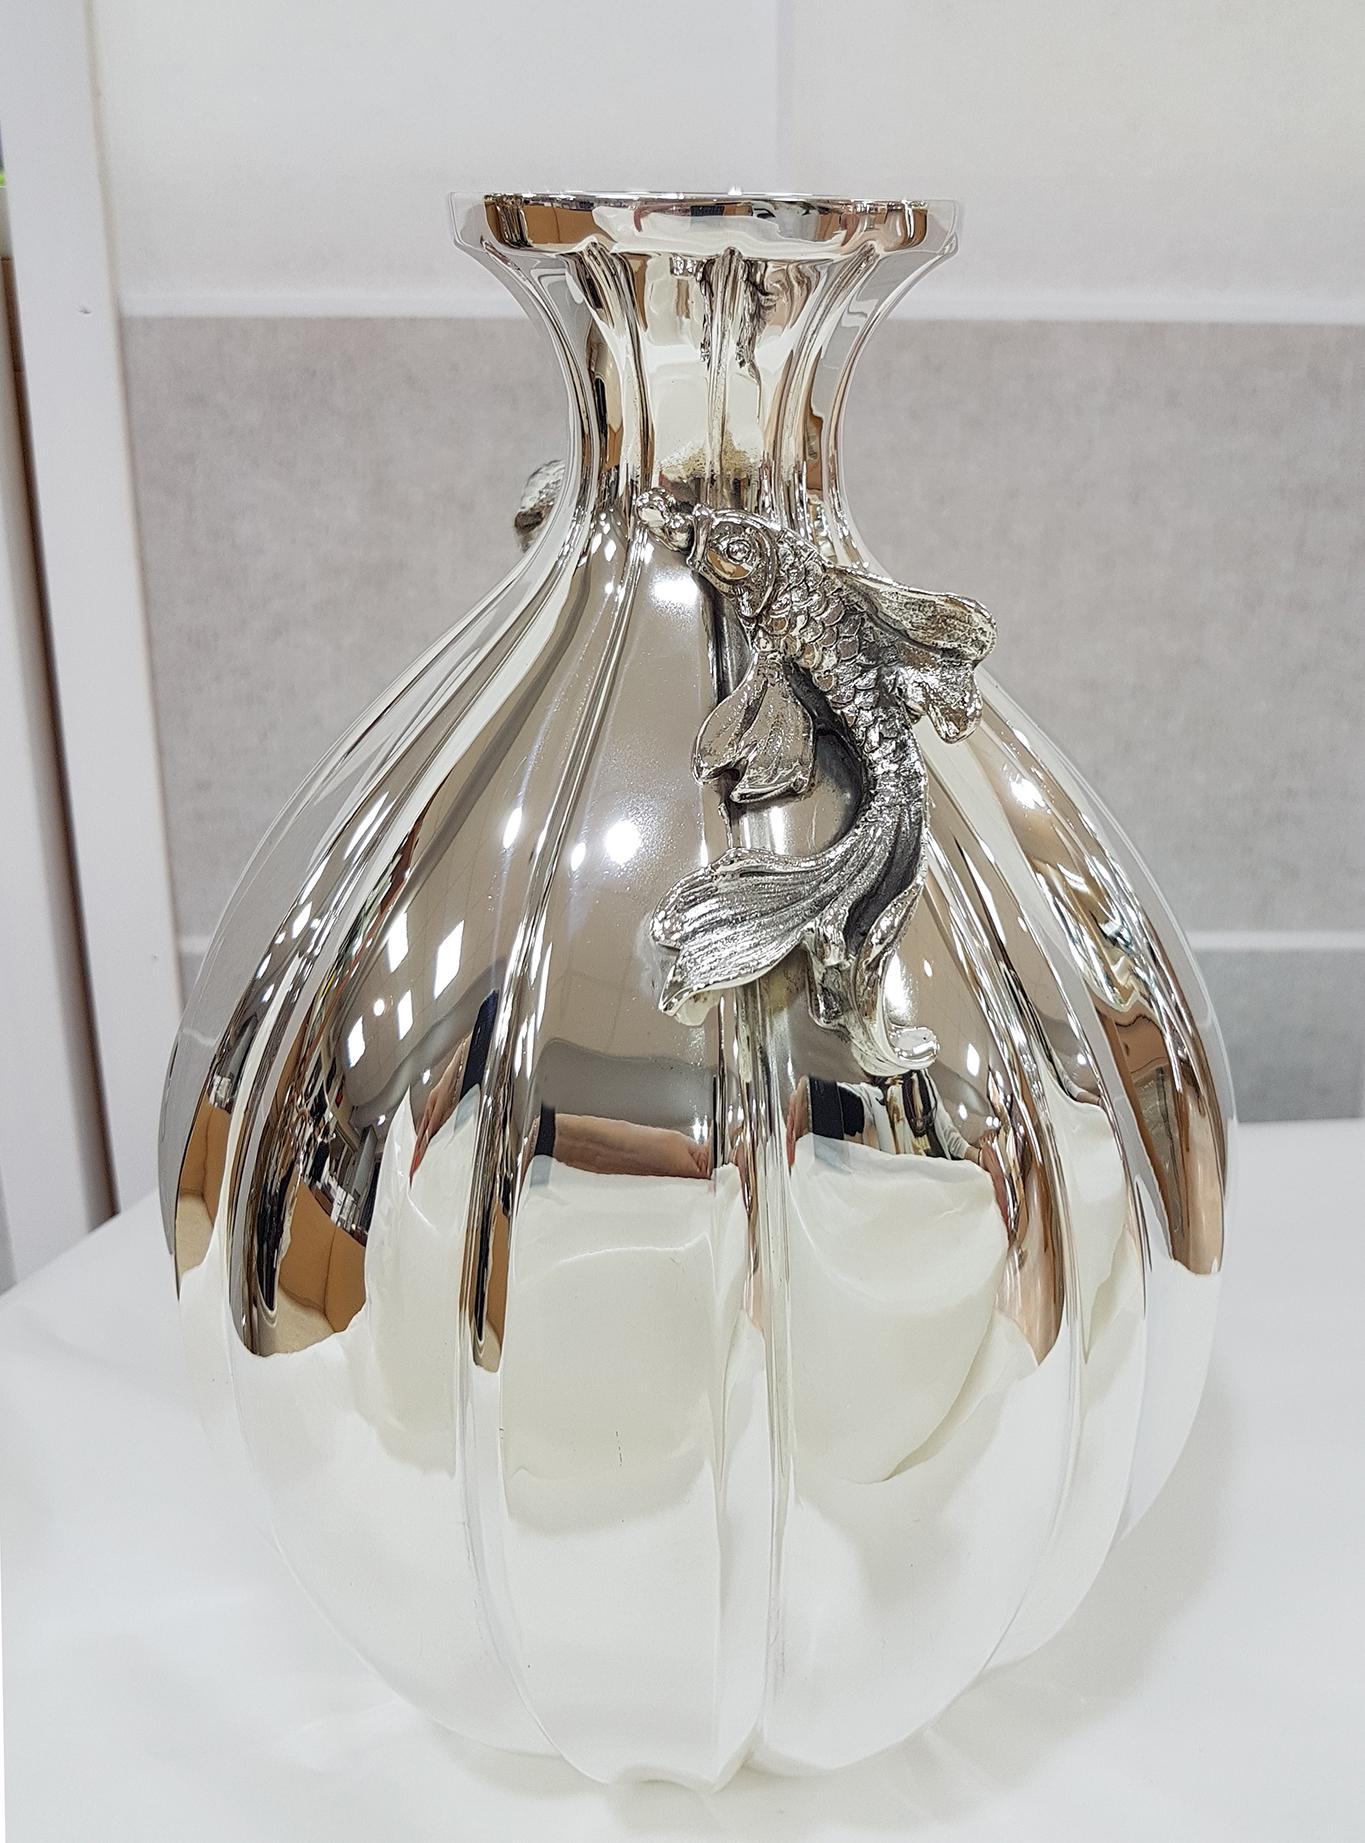 Italian Sterling Silver Handmade Vase with Ceased Strips and Fish For Sale 1